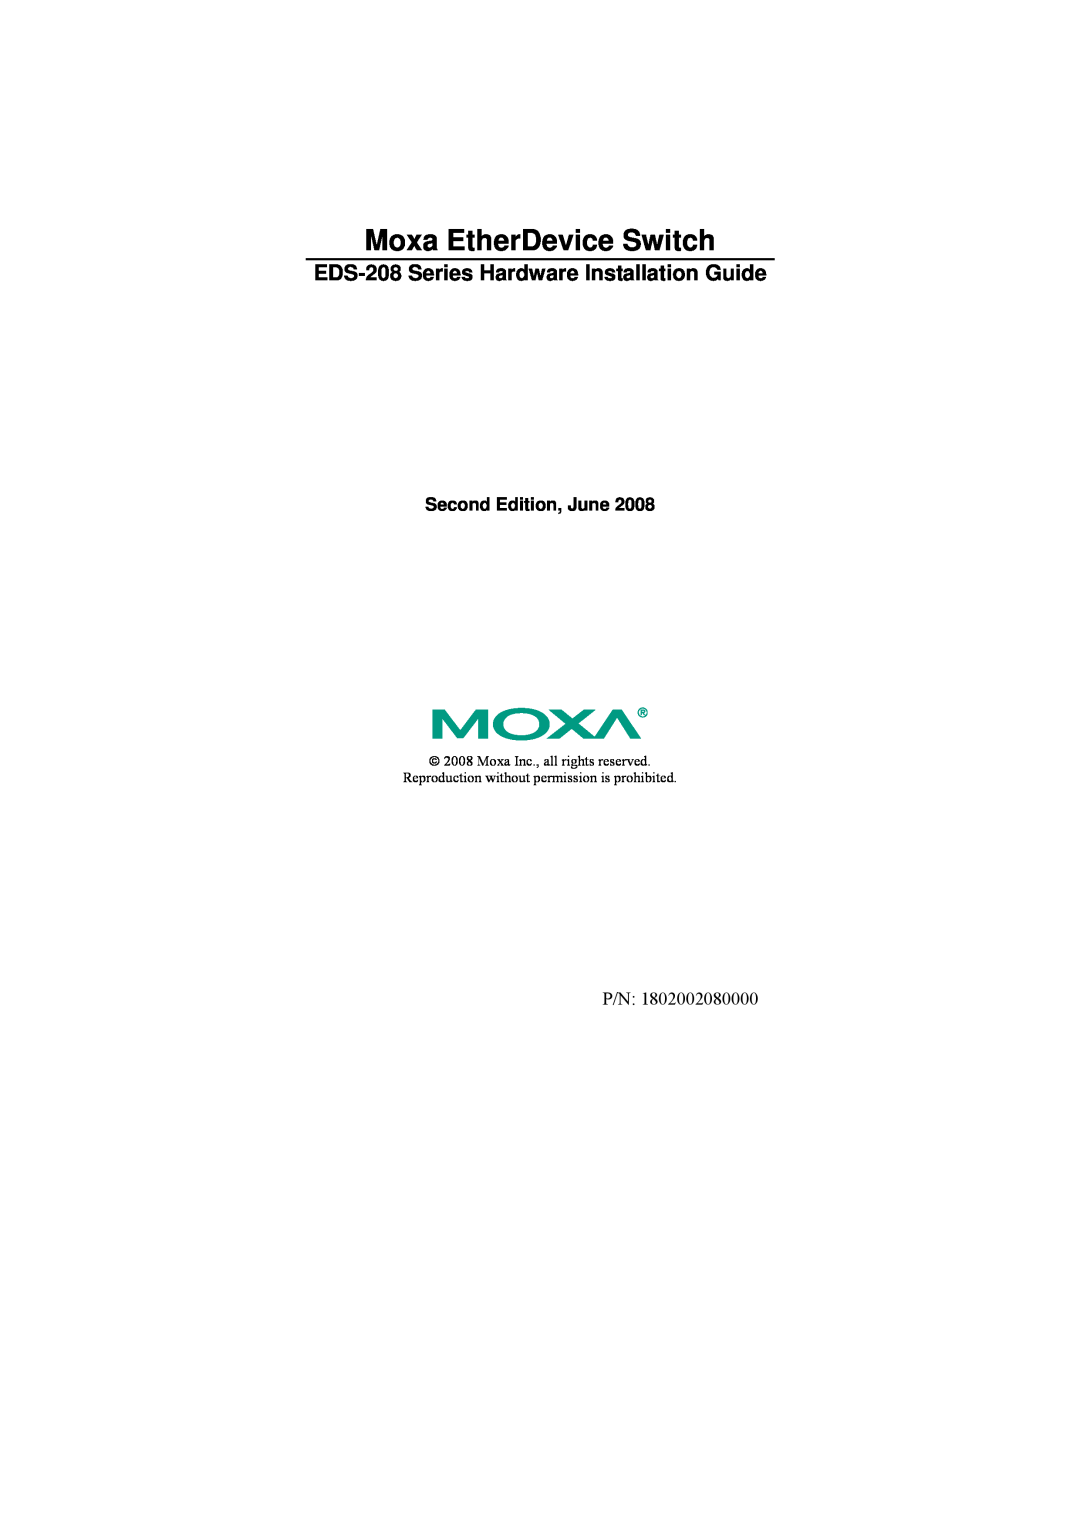 Moxa Technologies EDS-208-M-SC, EDS-208-M-ST manual Moxa EtherDevice Switch, EDS-208 Series Hardware Installation Guide 